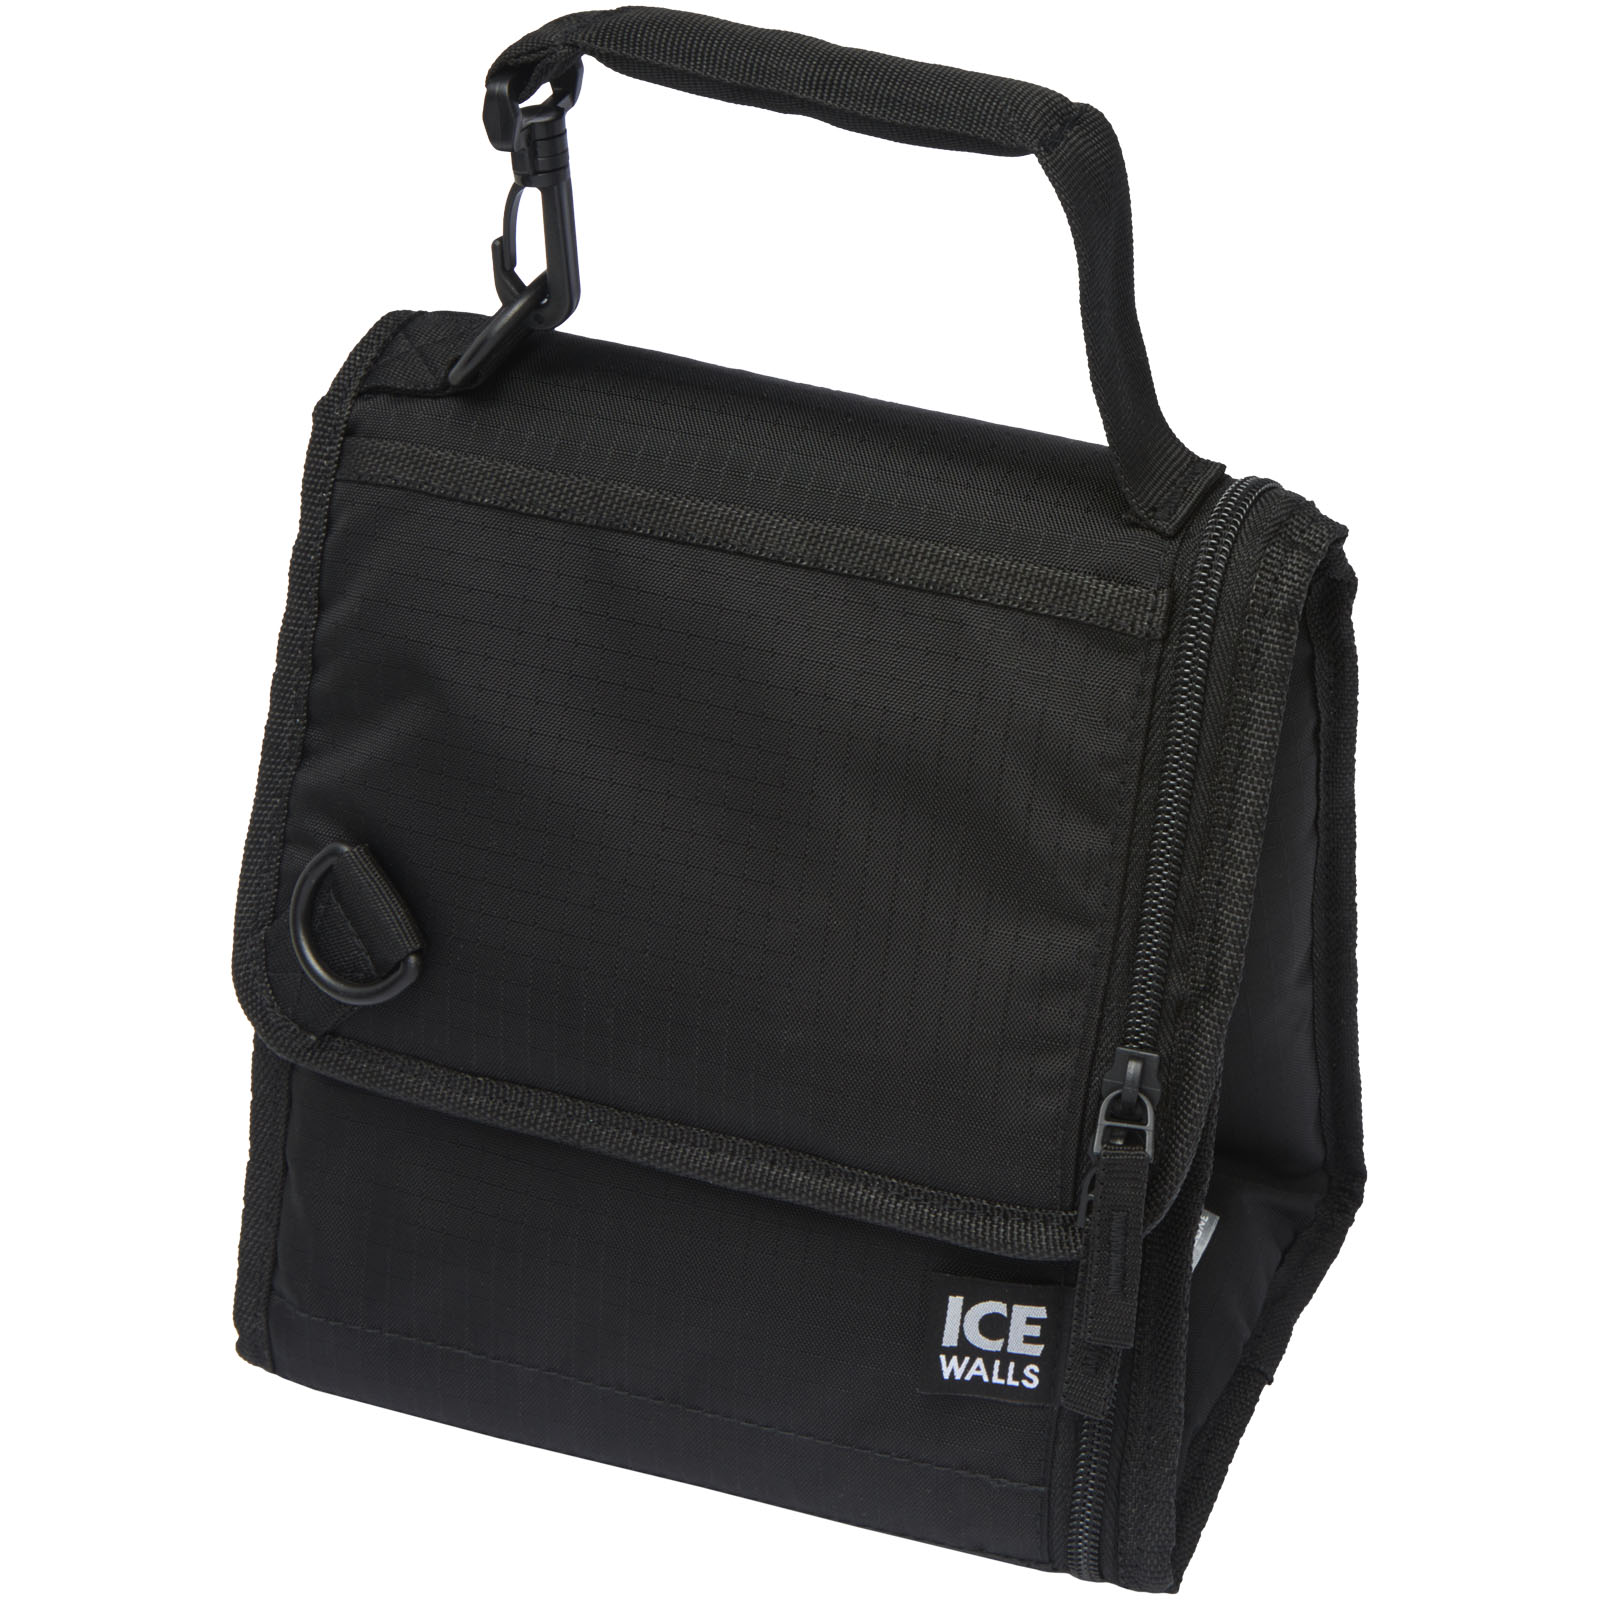 Advertising Cooler bags - Arctic Zone® Ice-wall lunch cooler bag 7L - 0